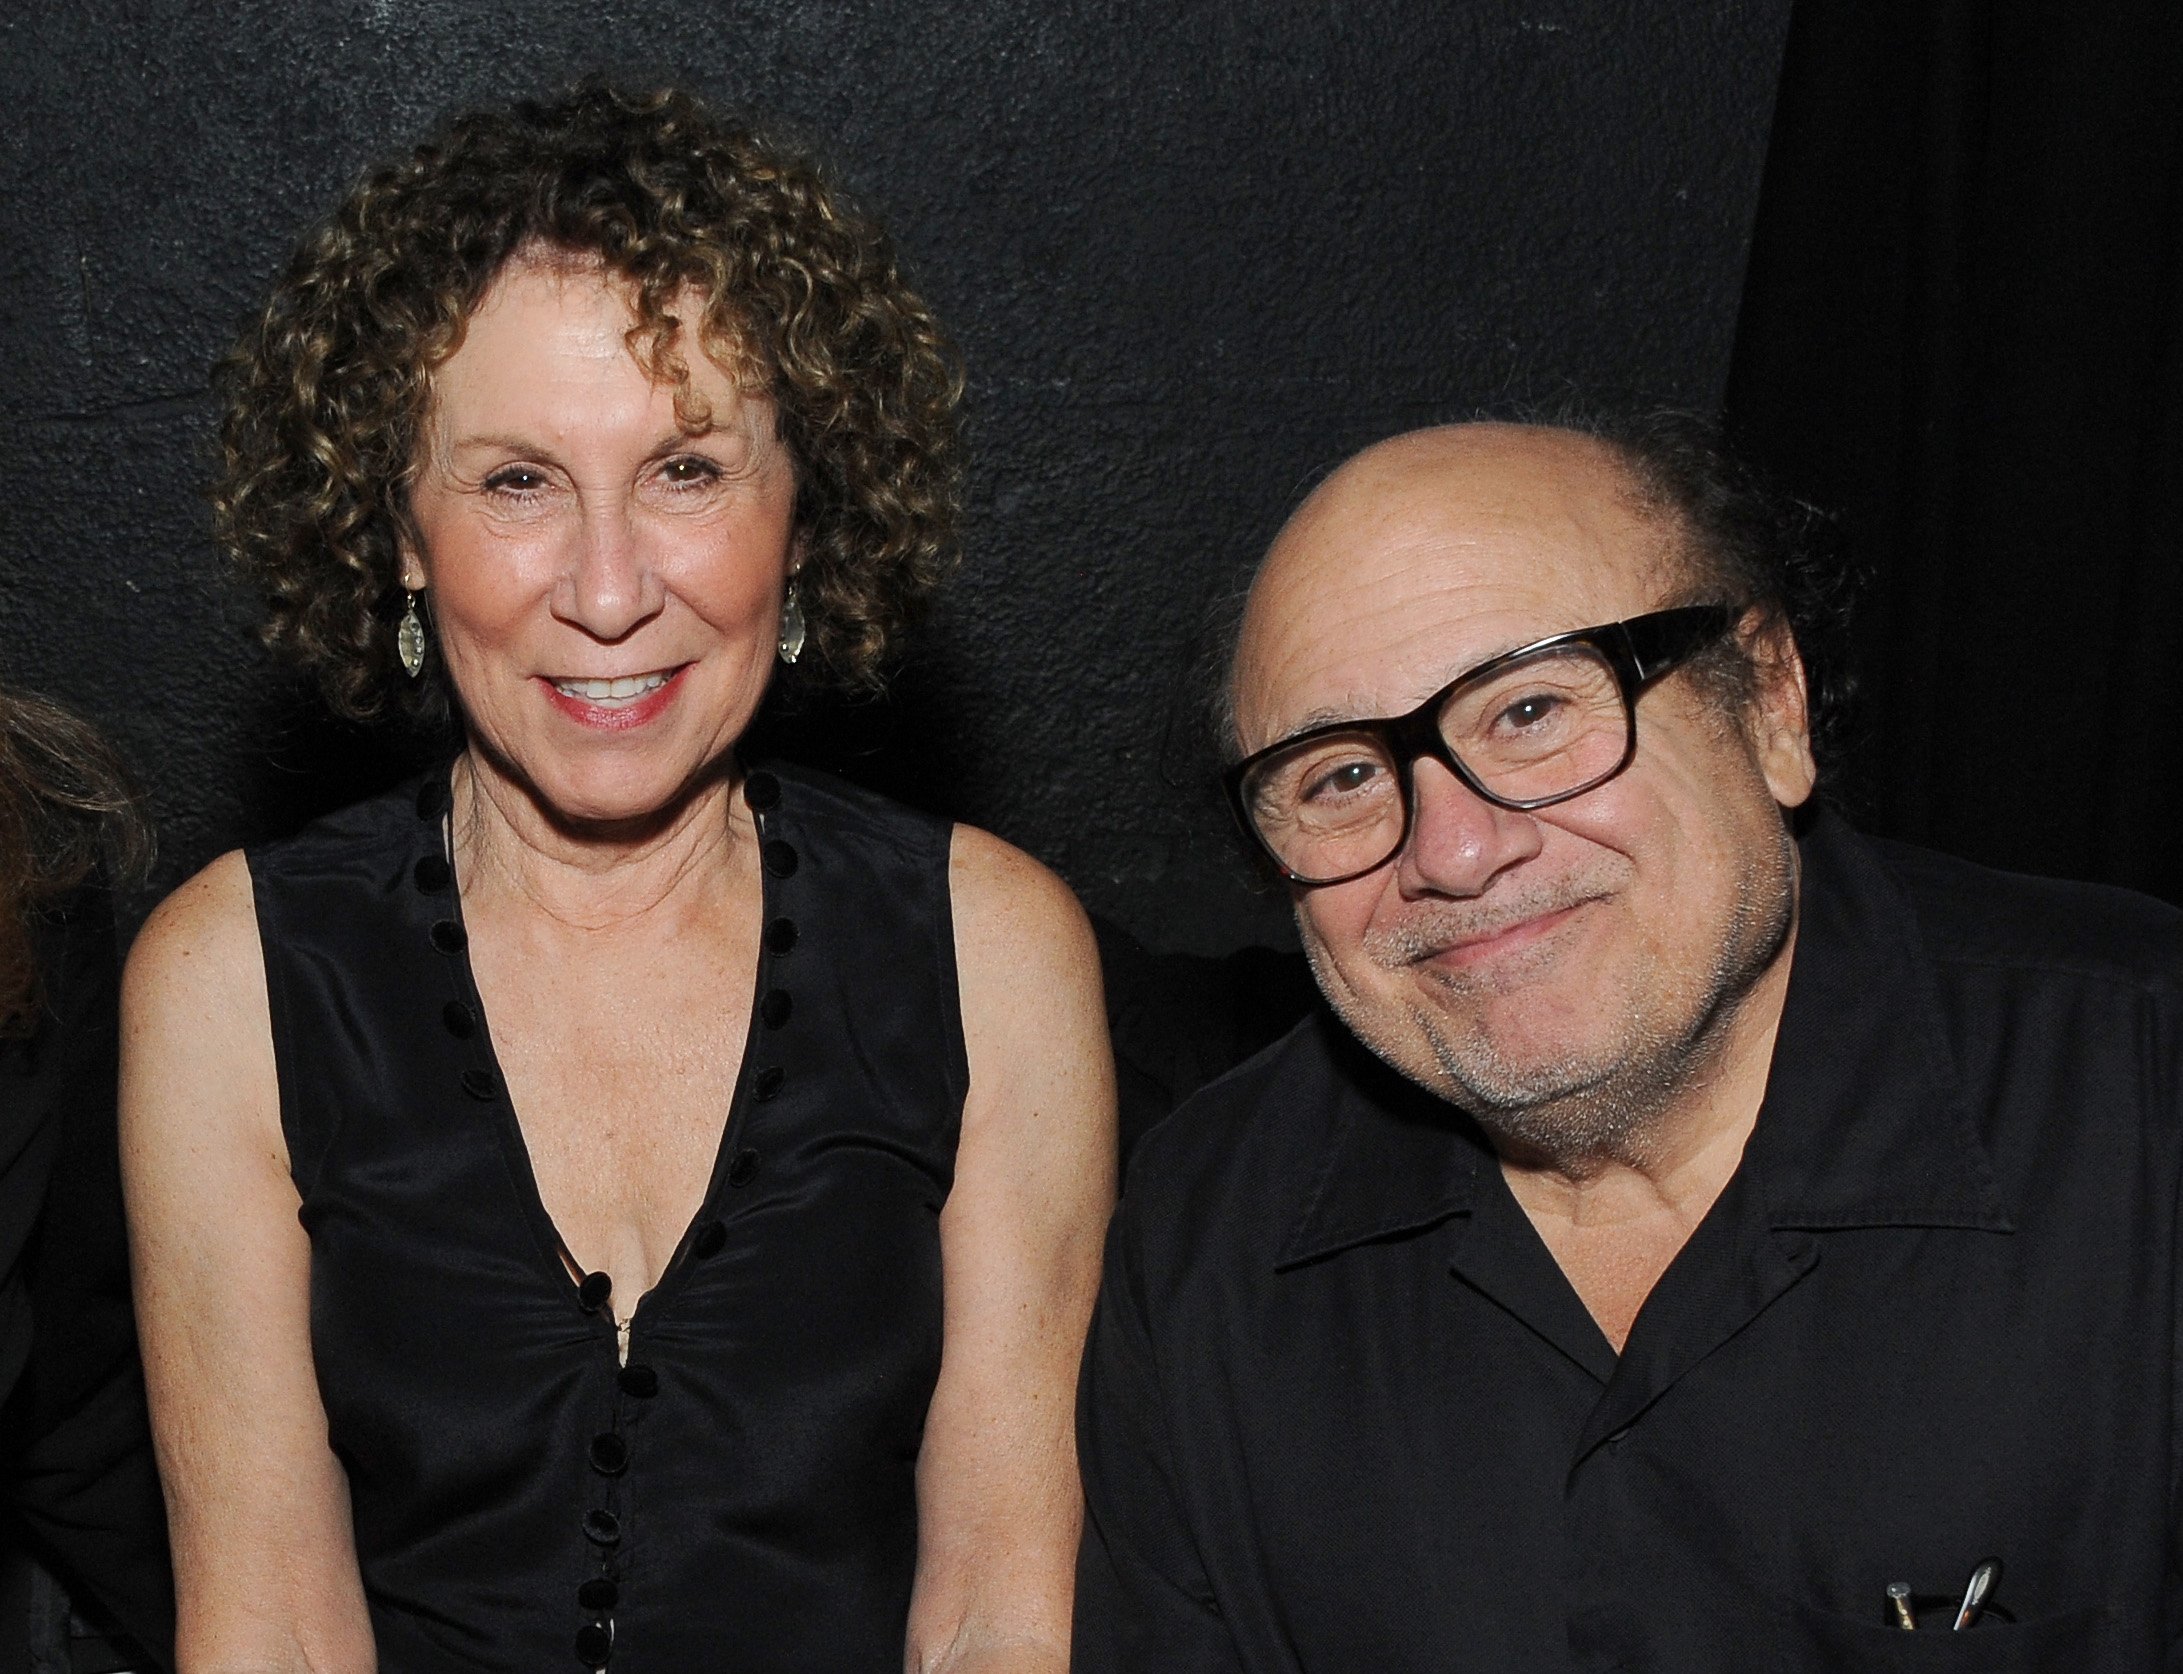 Rhea Perlman and Danny DeVito attend the International Myeloma Foundation 8th Annual Comedy Celebration at The Wilshire Ebell Theatre on November 8, 2014 in Los Angeles, California. Photo: Getty Images